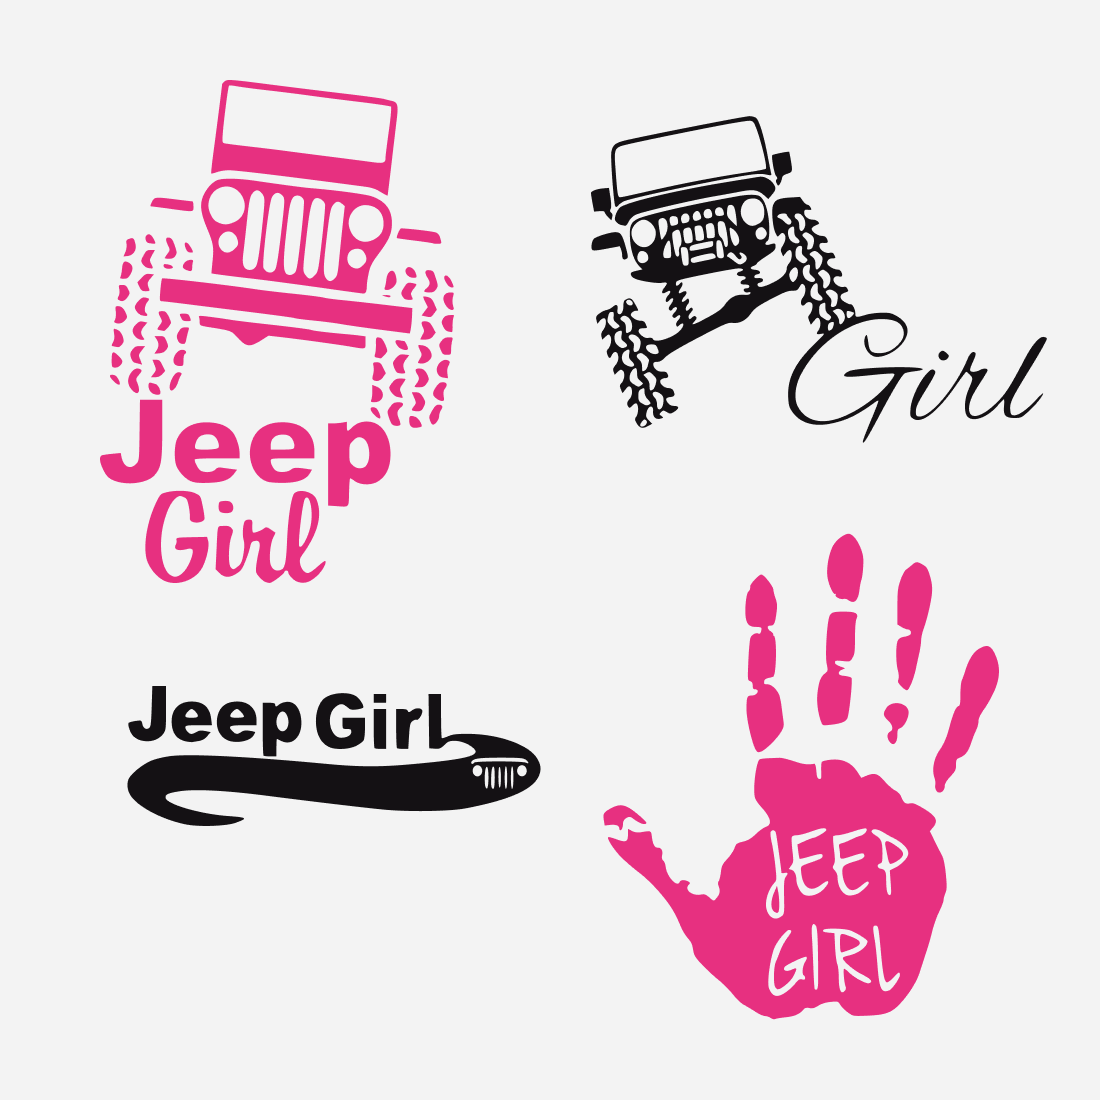 Jeep Girl inscription and the image of jeeps in motion.